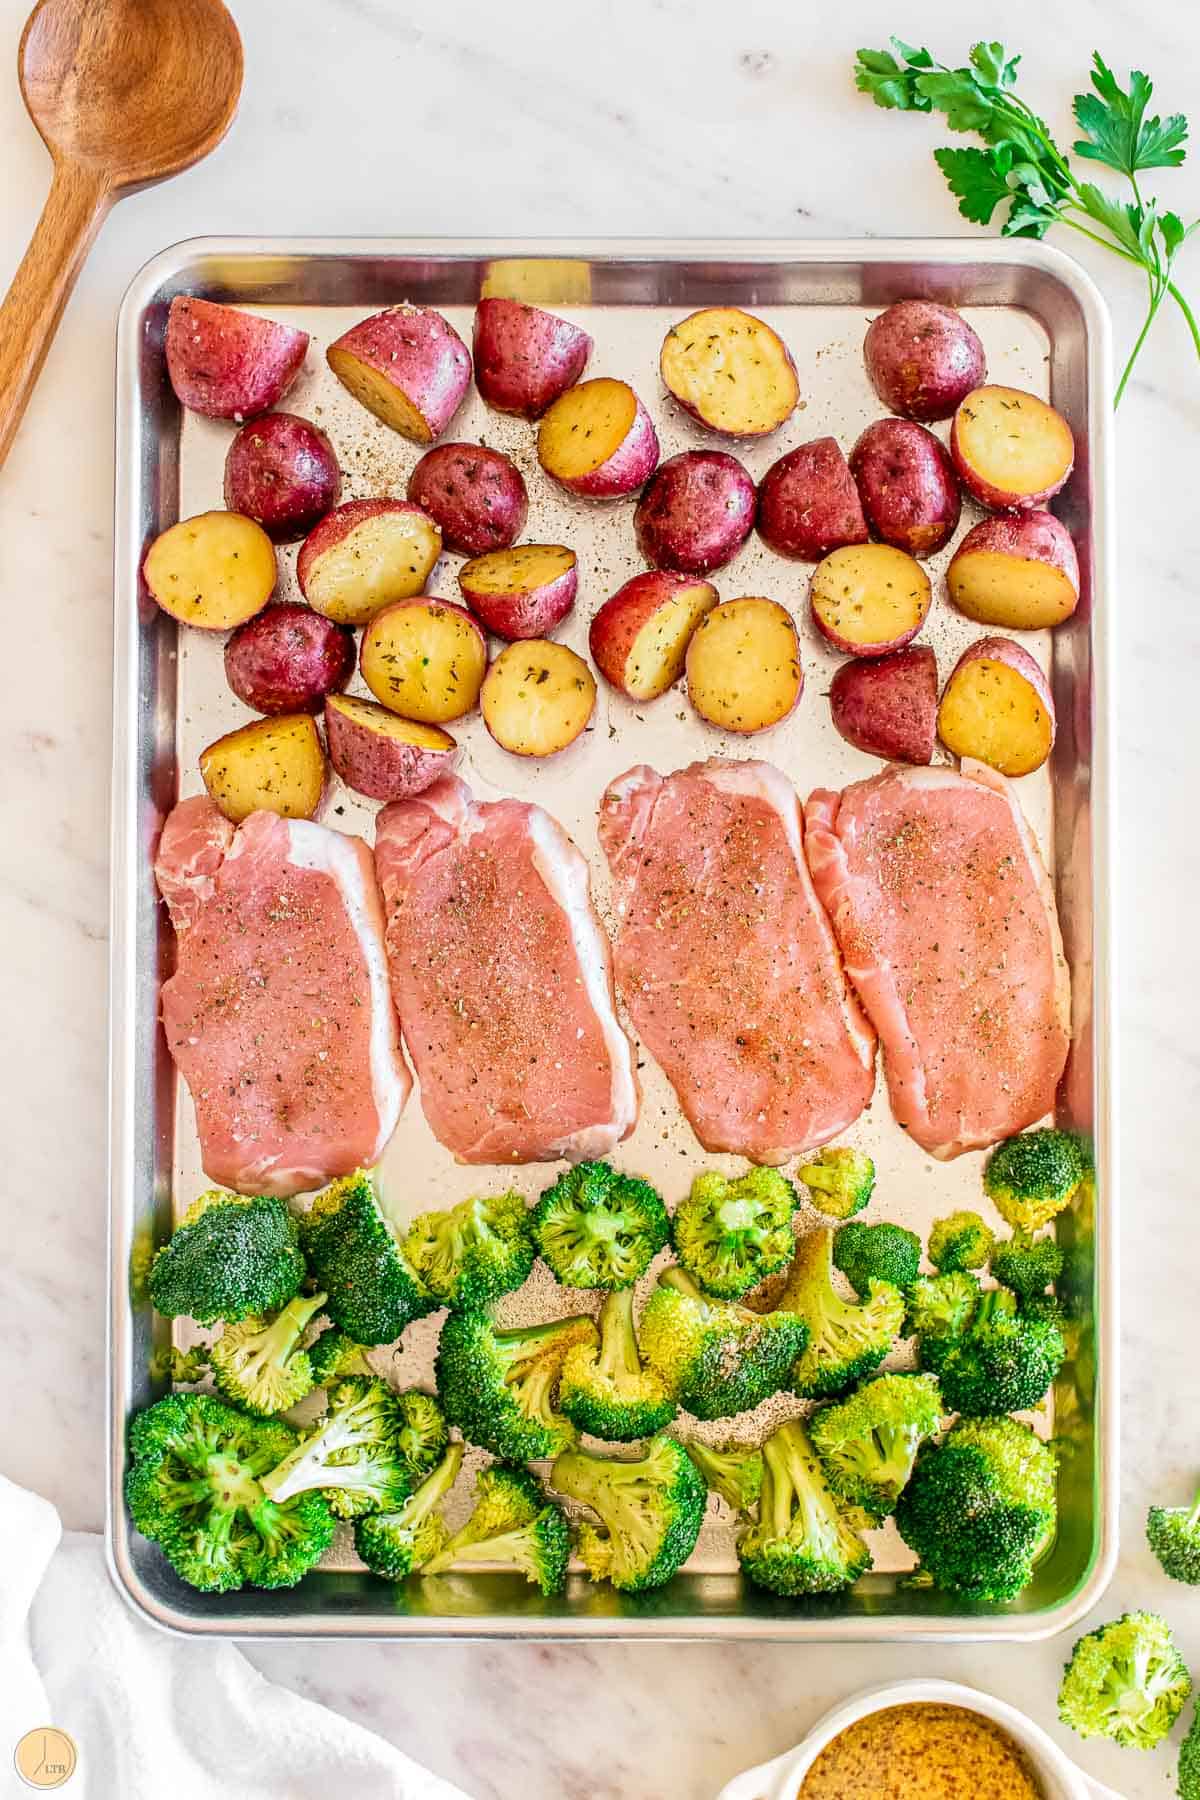 place pork chops on sheet pan after drying with a paper towel